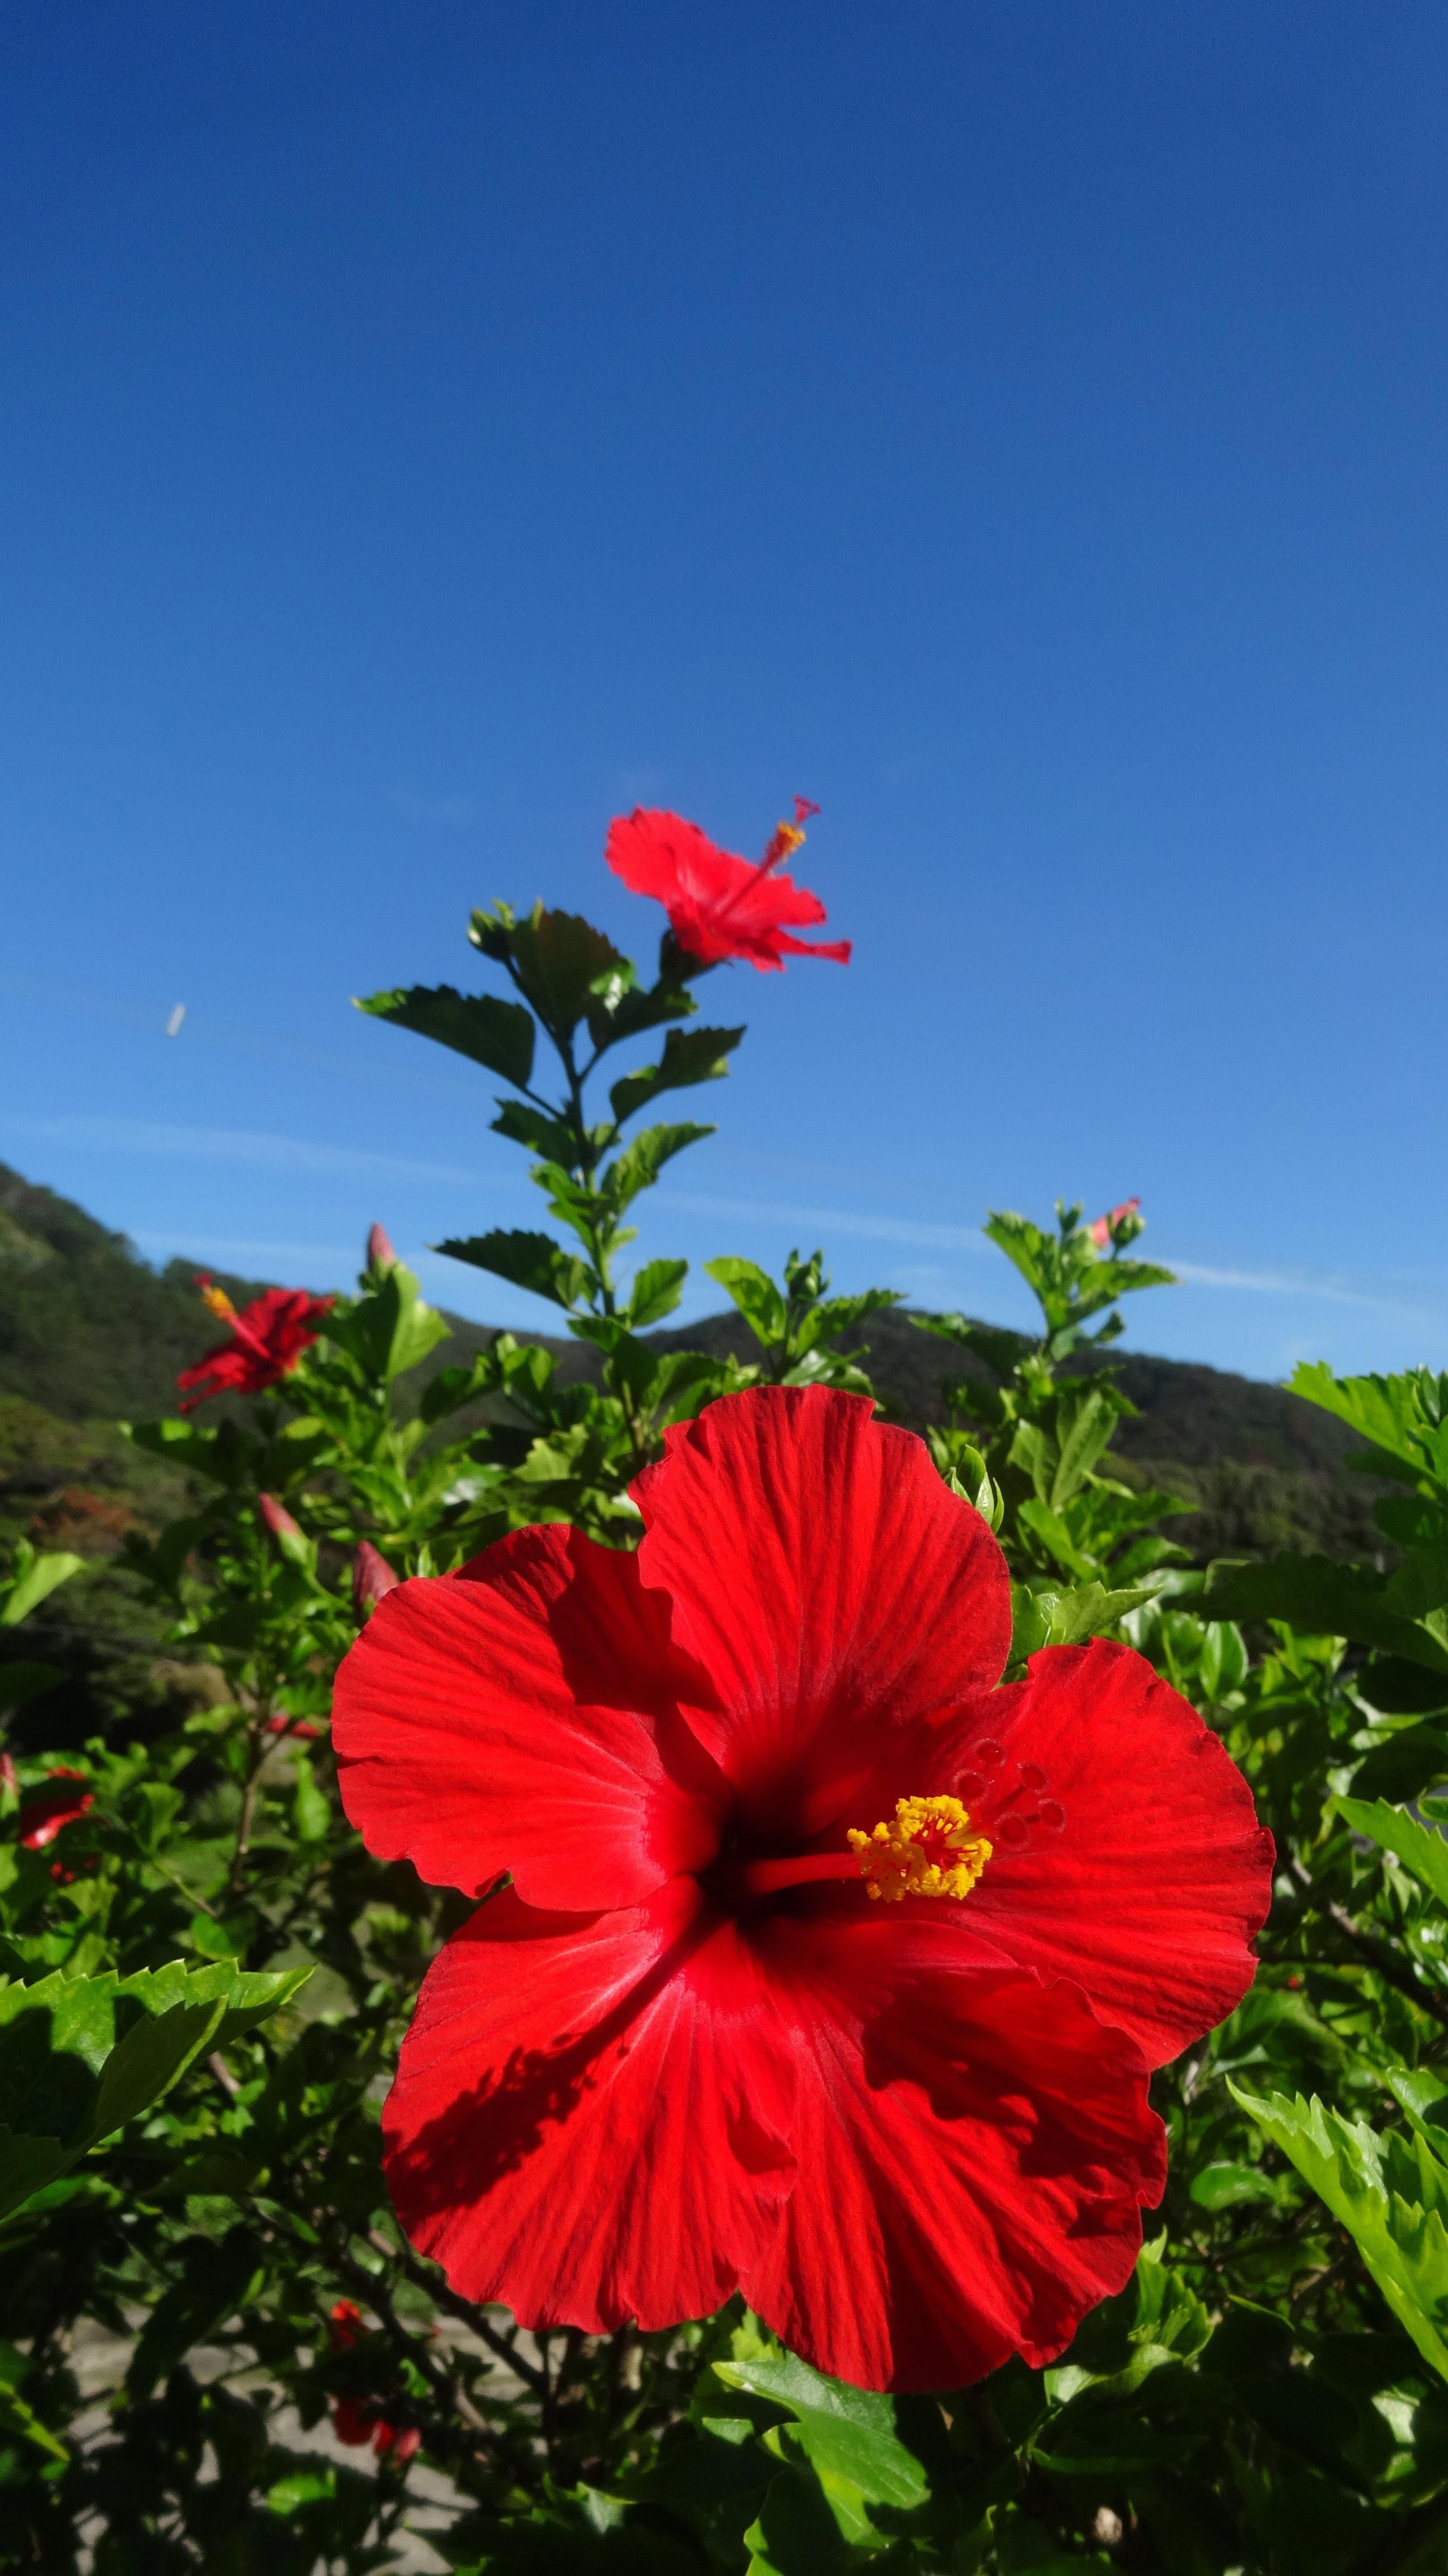 25 Selected hibiscus flower wallpaper aesthetic You Can Get It Free Of